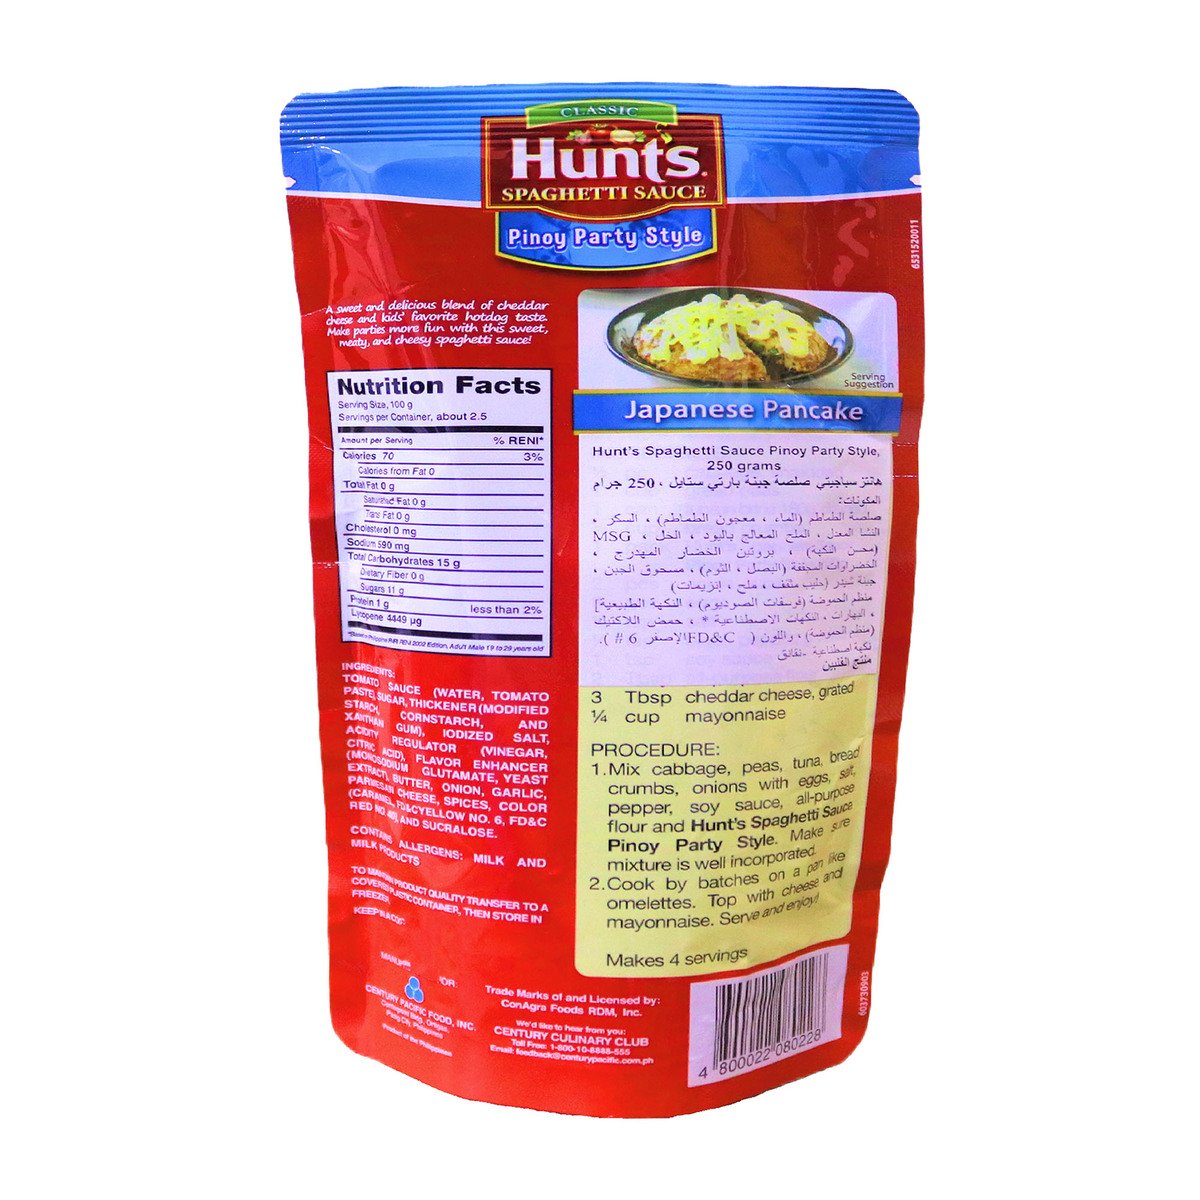 Hunts Pinoy Party Style Spaghetti Sauce 250 g